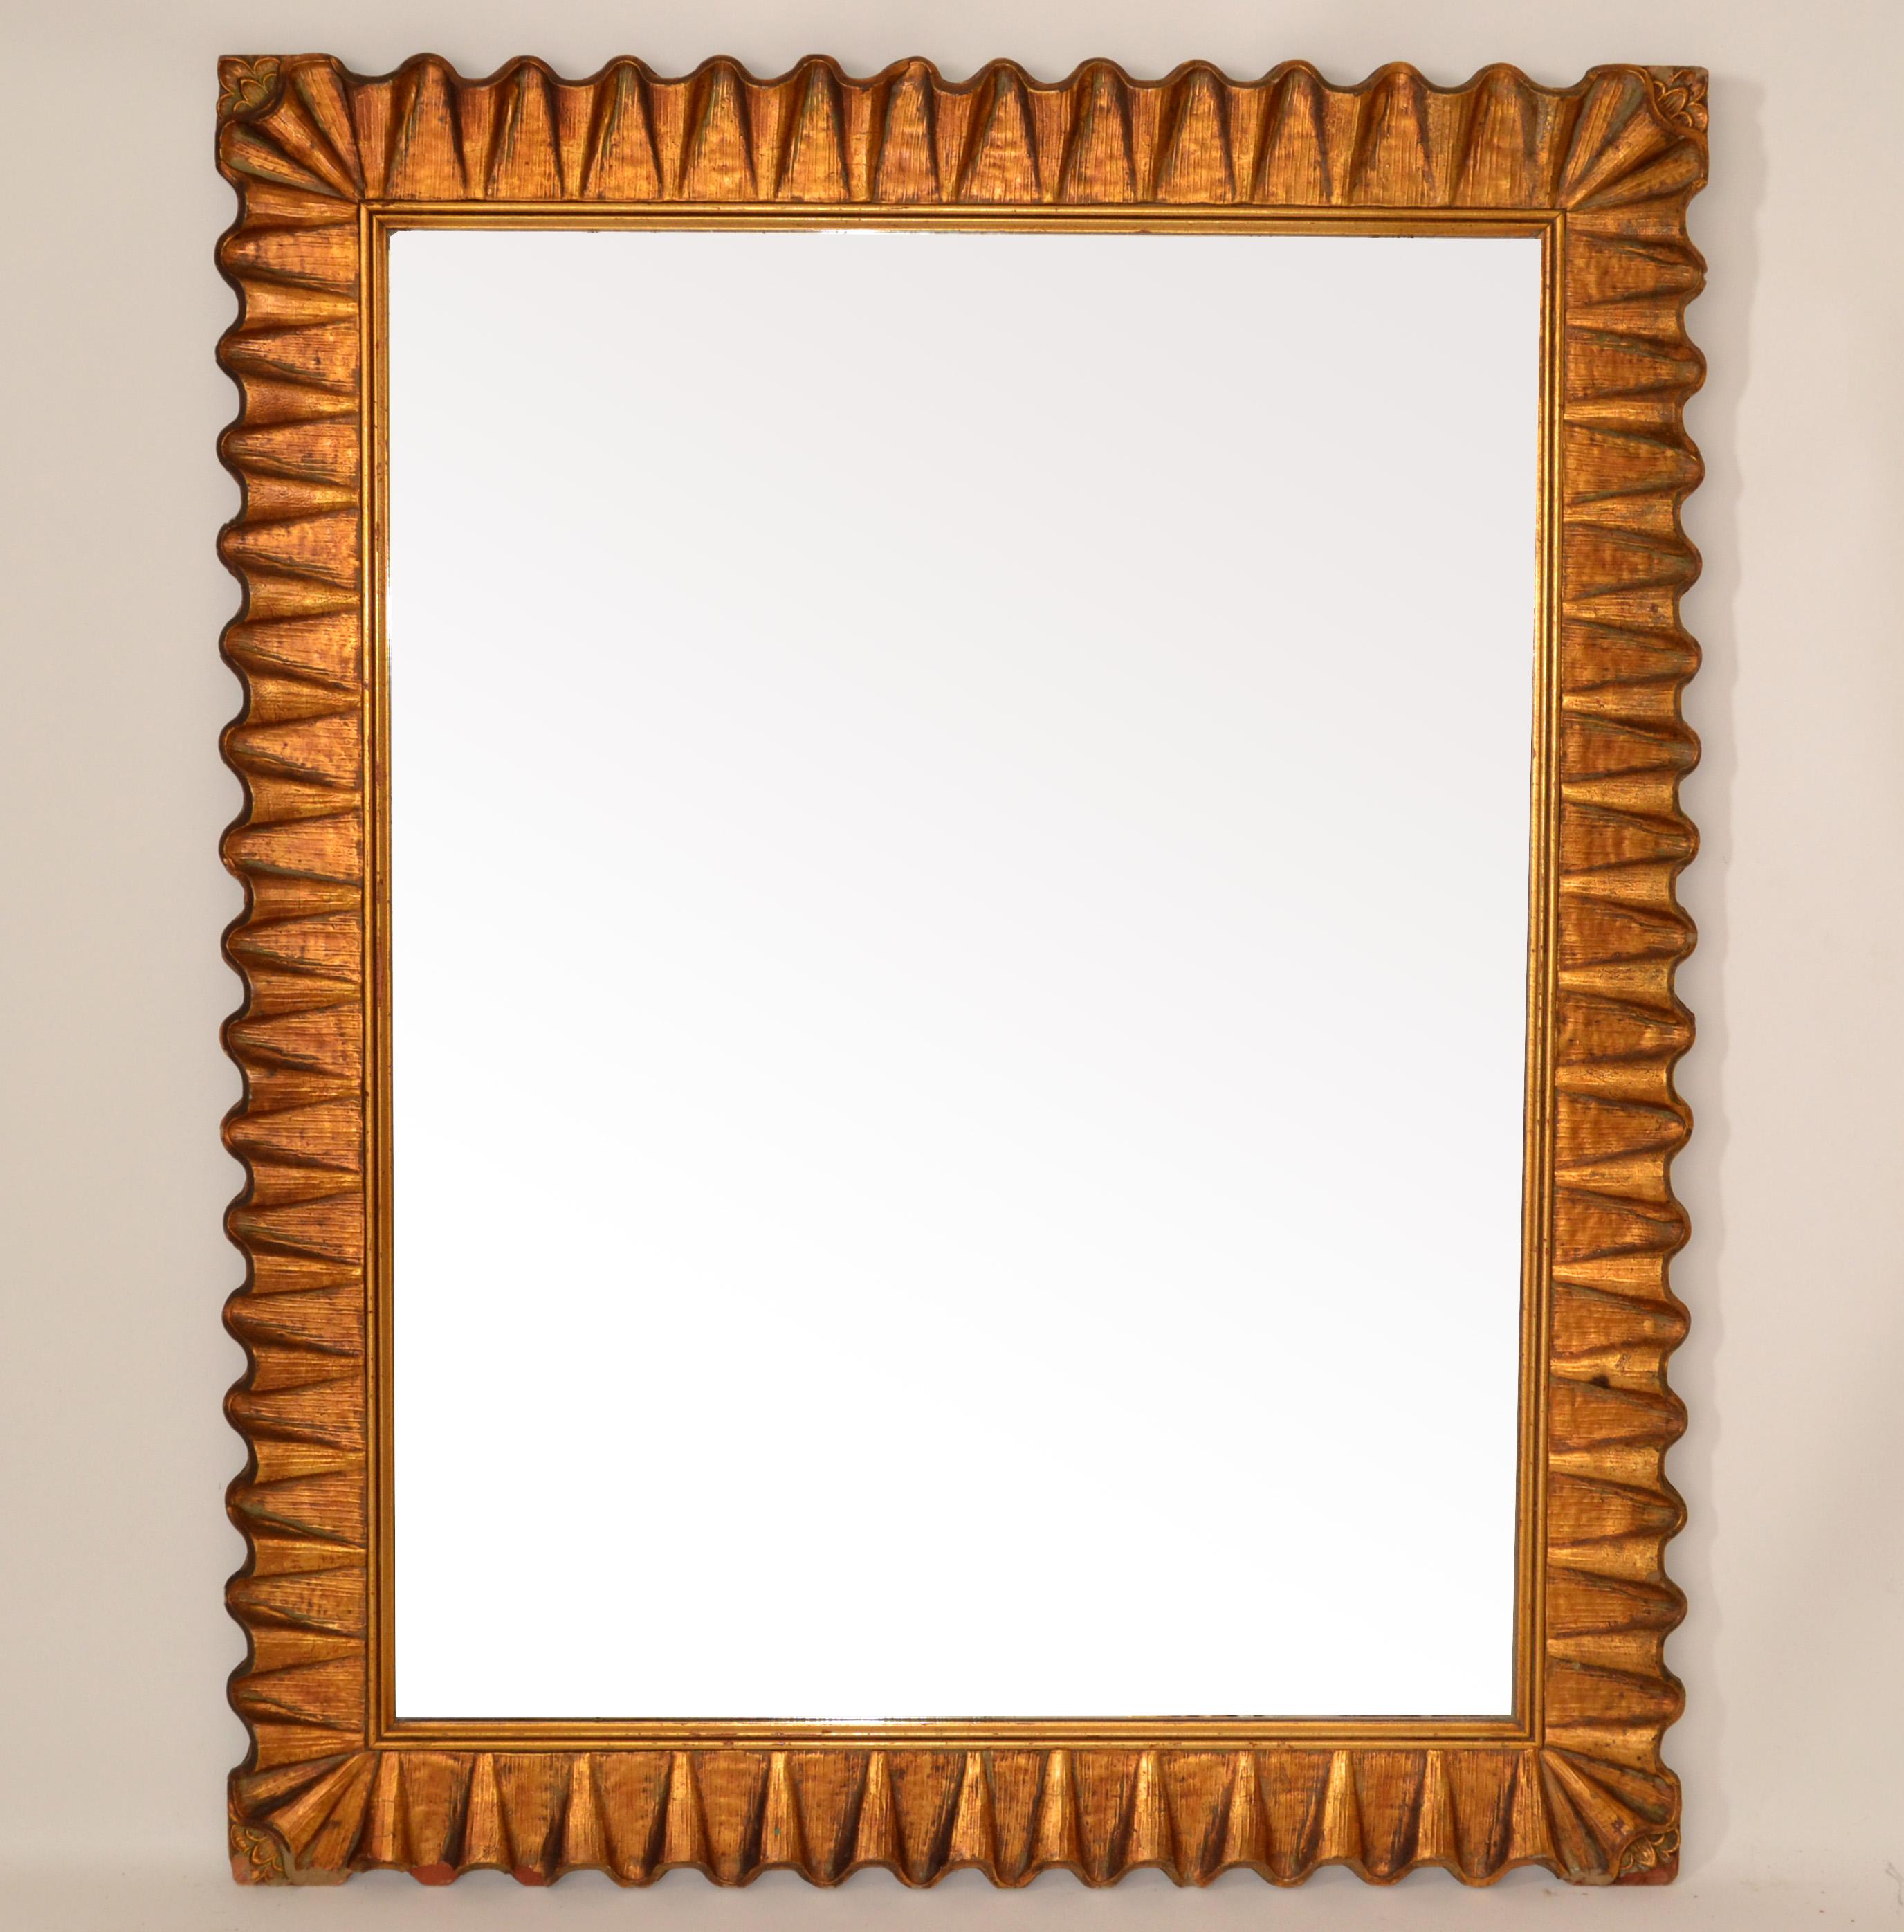 1940s hand-carved Art Deco scalloped rectangle Wall Mirror in Gilt Wood made in America.
In all original condition with some losses to one corner and scuffs due to History and use and foxing to the Mirror Glass.
Mirror Size: 33.25 x 25.5 inches.